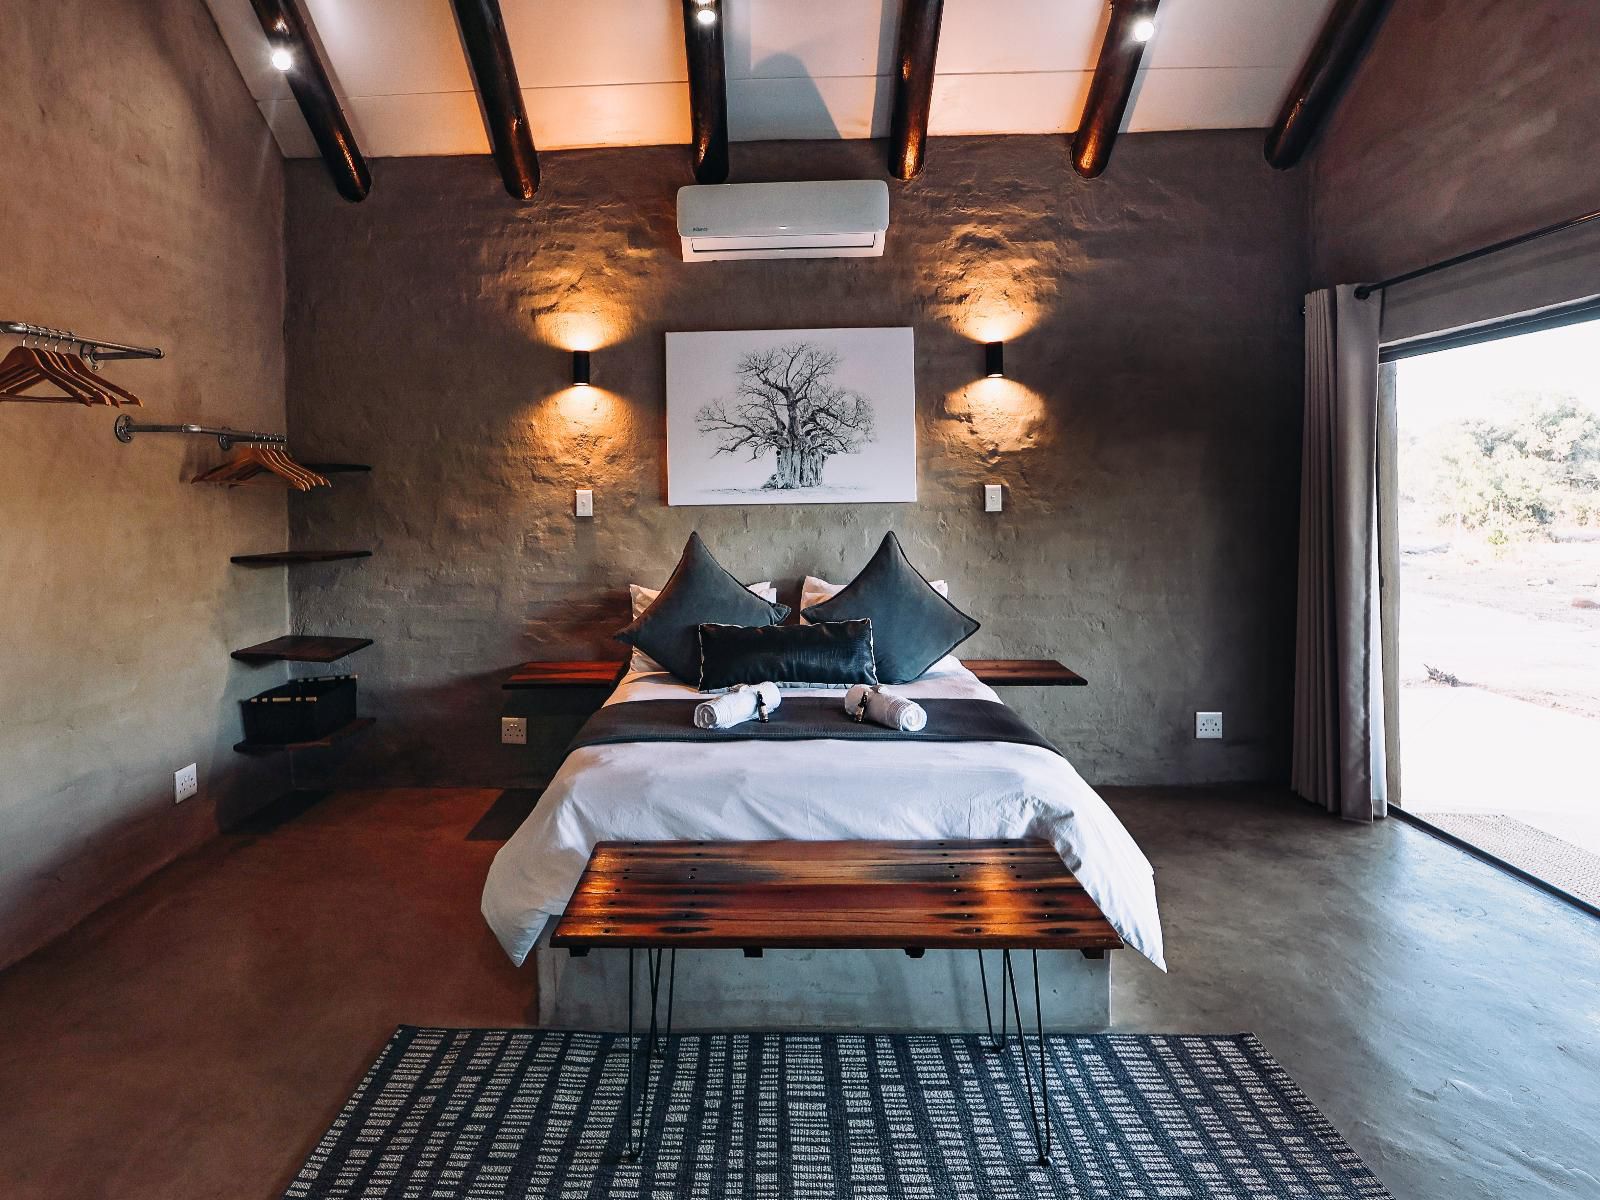 Rhino S Rest Luxury Self Catering Home Hoedspruit Limpopo Province South Africa Bedroom